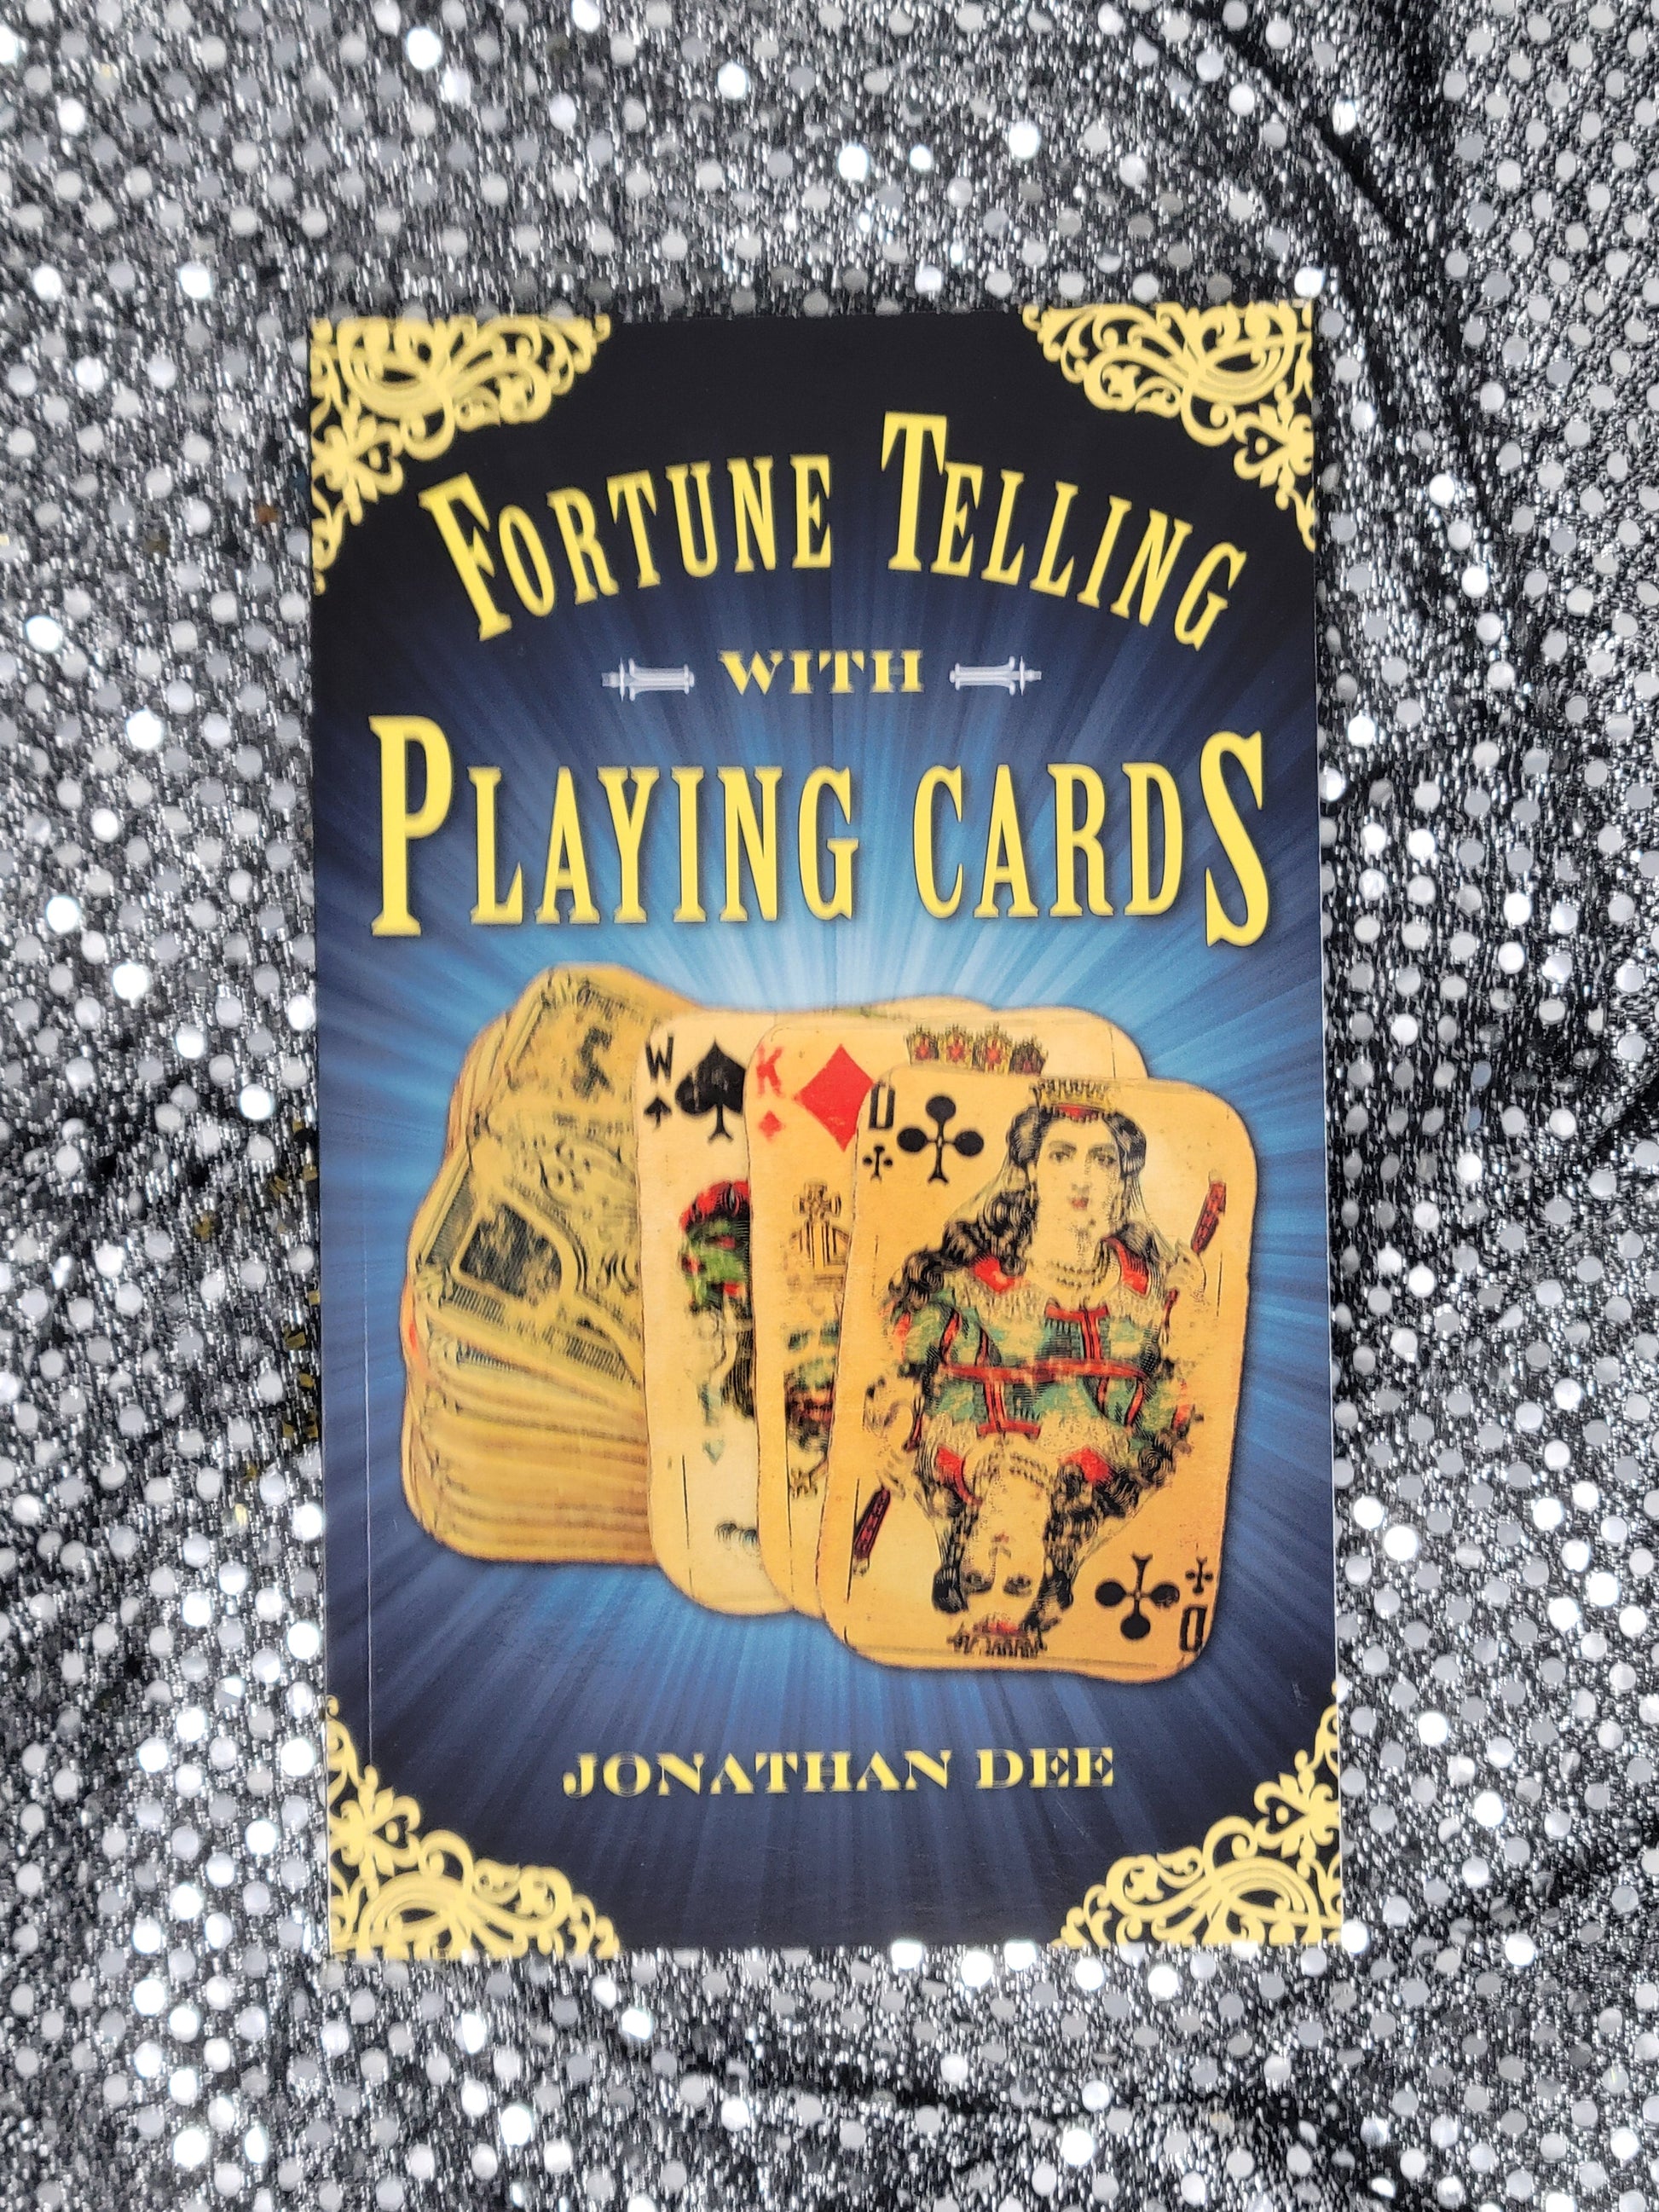 Fortune Telling with Playing Cards - By Jonathan Dee